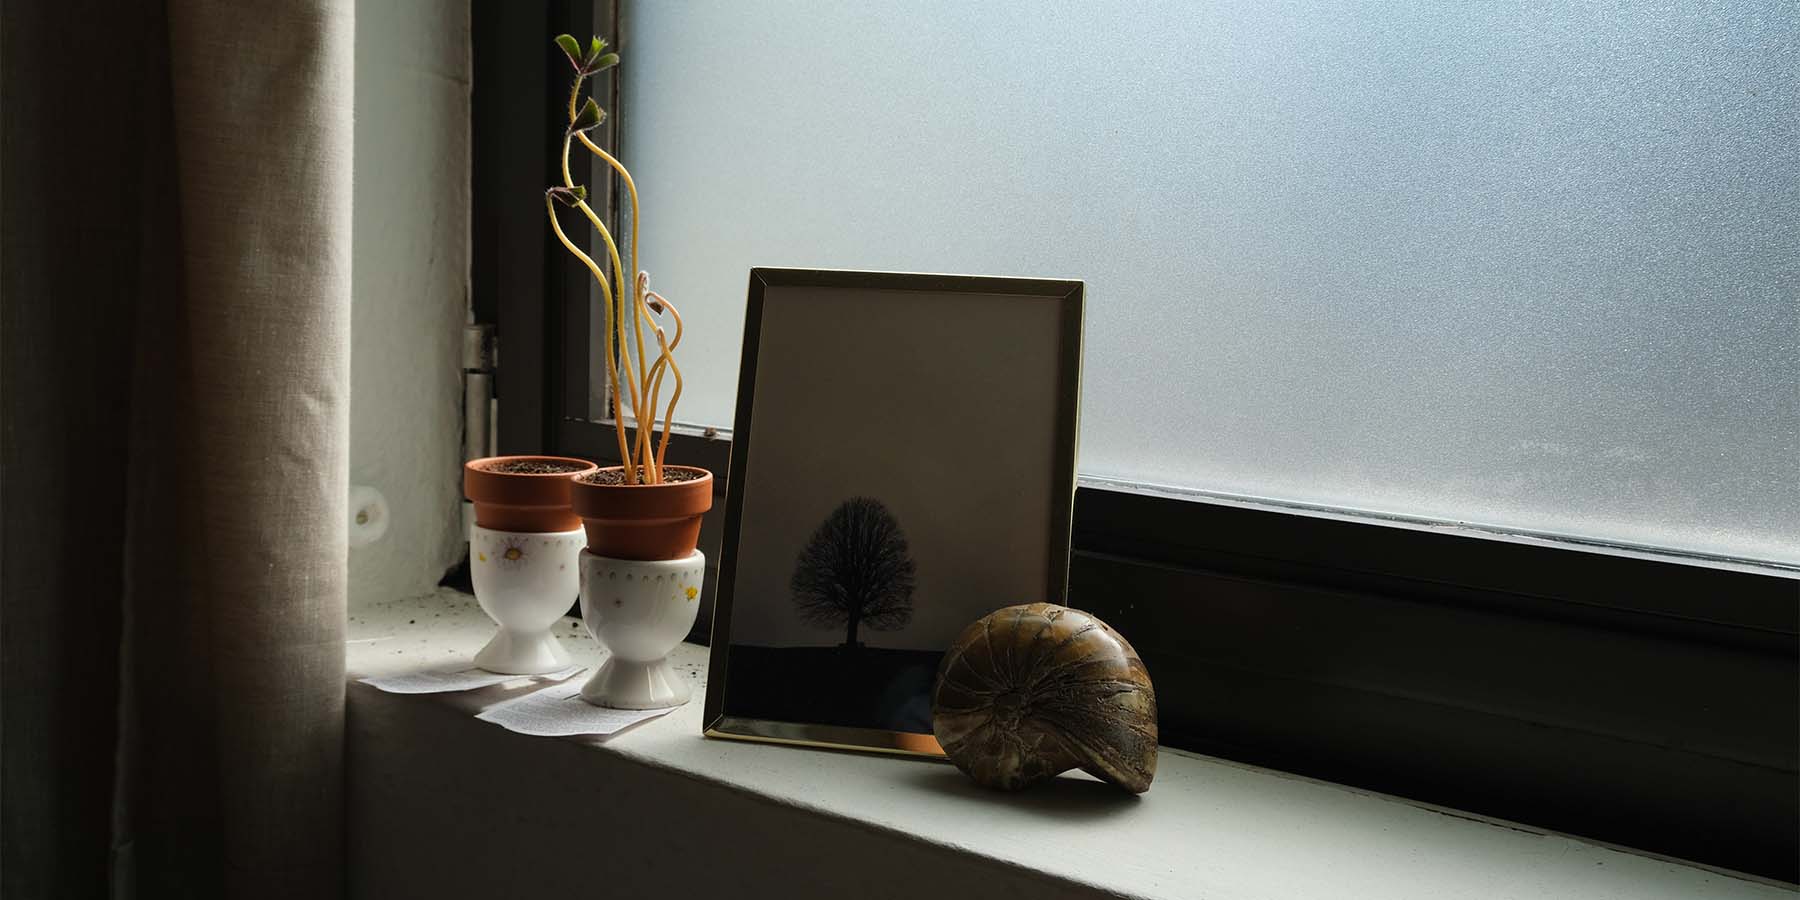 Seashell, beansprout, and tree photo on a windowsill.